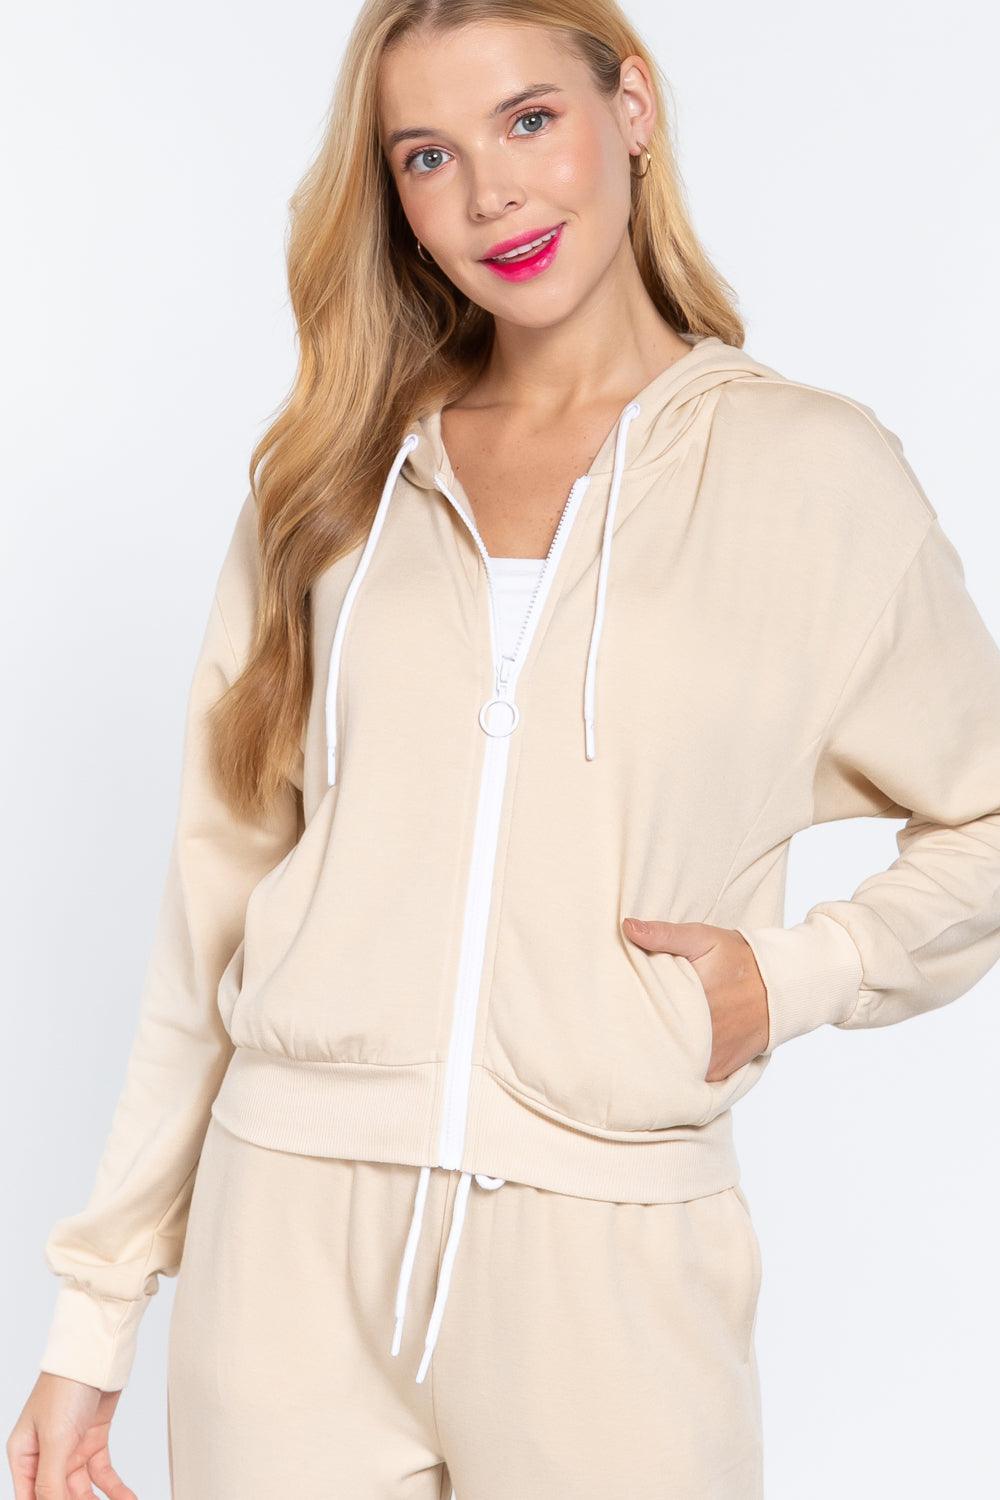 Buying Guide: Stylish and Healthy Dresses 2023 | Fashionably Fit | Fleece French Terry Jacket